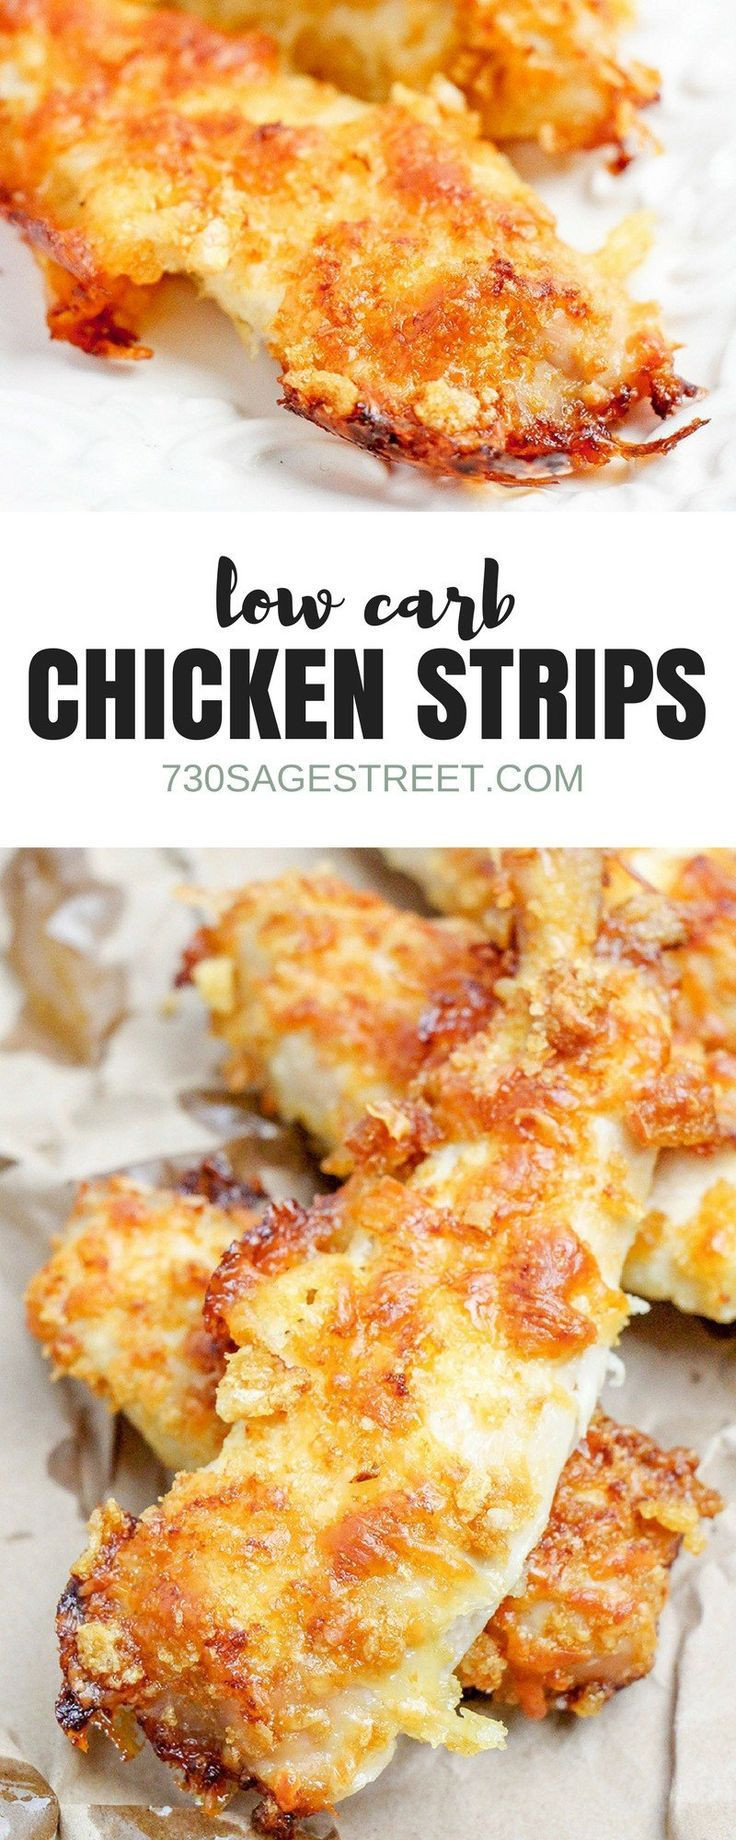 Low Carb Breaded Chicken Tenders
 Baked Chicken Tenders – Low Carb Keto "Breaded" Chicken